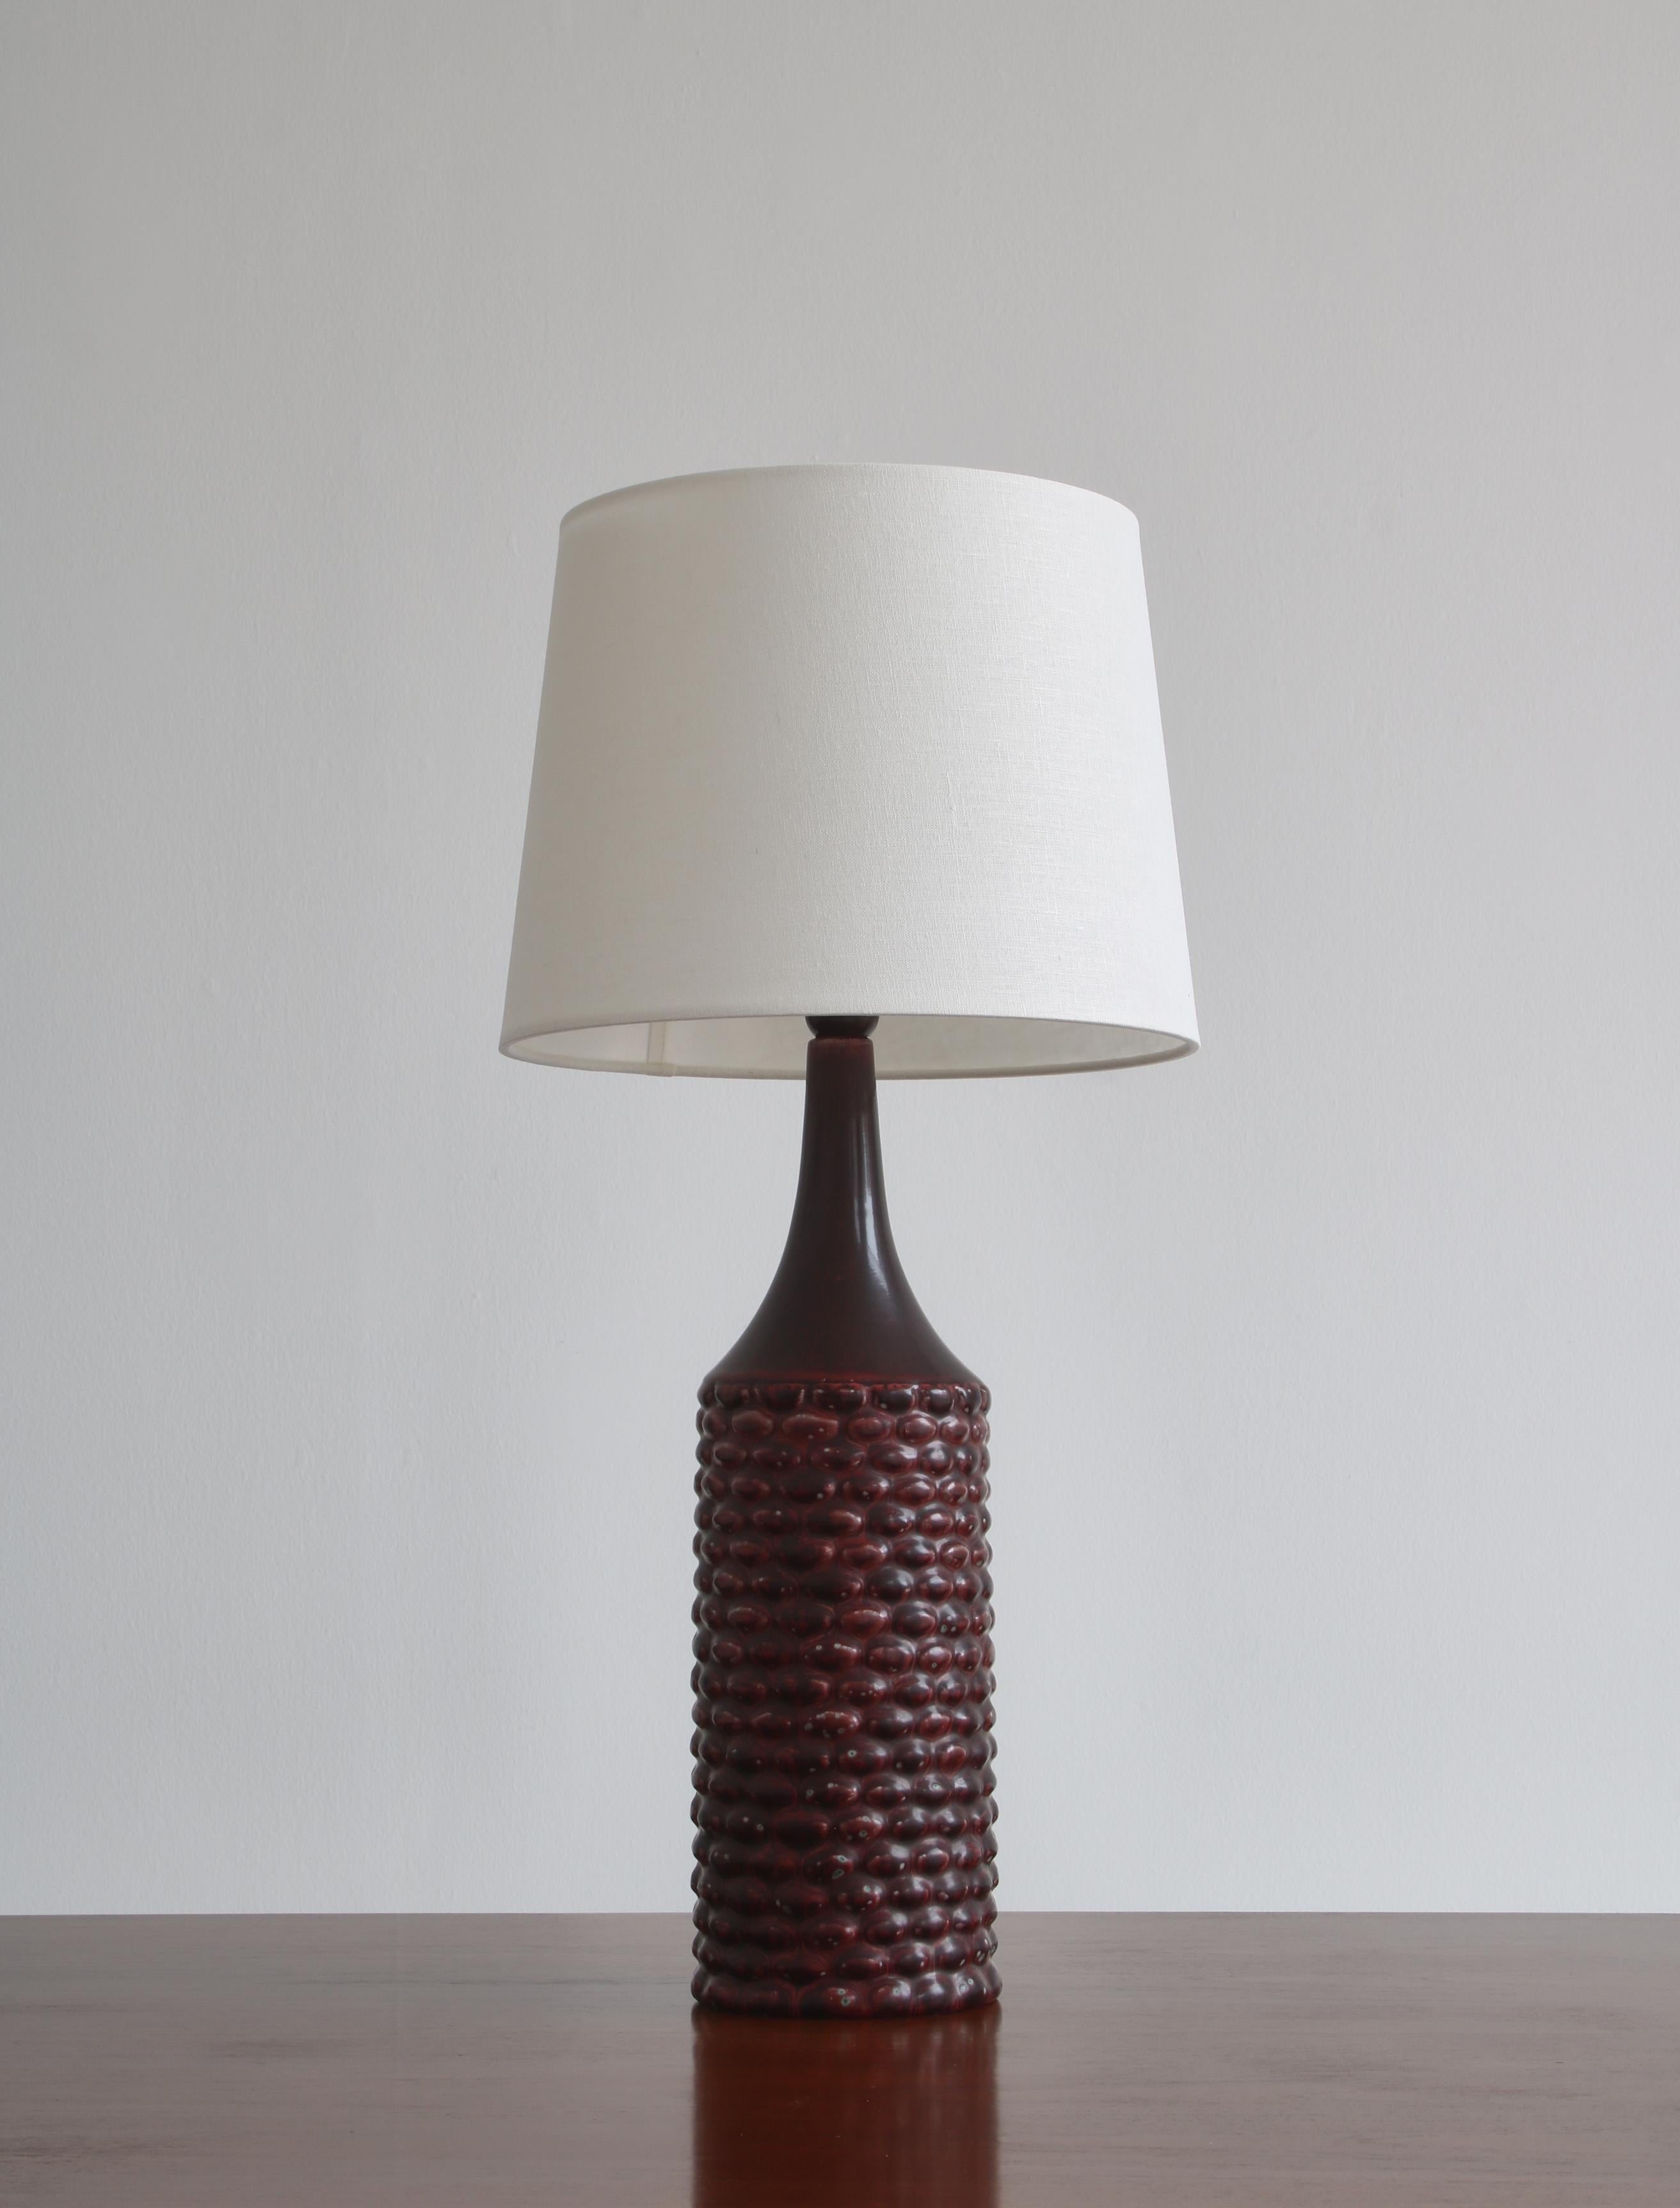 Axel Salto Large Table Lamp in Oxblood Glaze from Royal Copenhagen, 1958 In Good Condition For Sale In Odense, DK